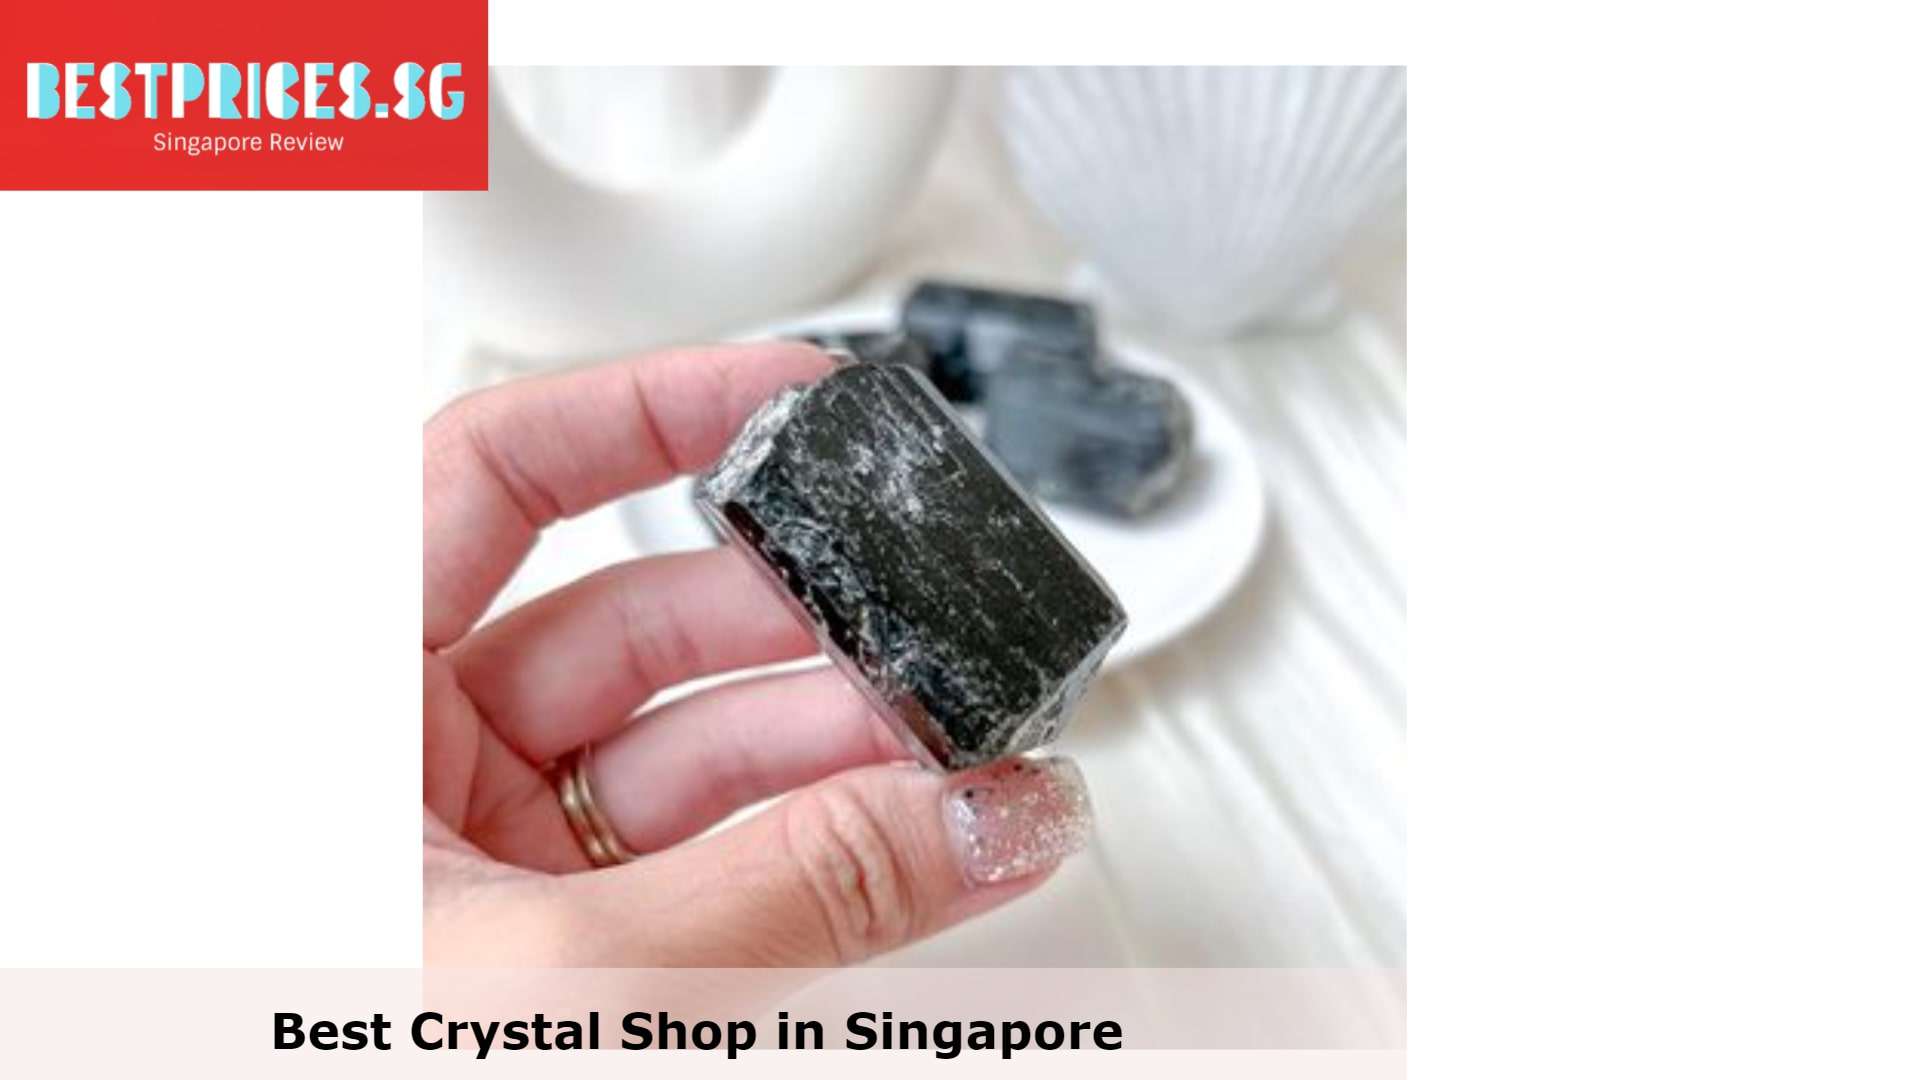 New Age FSG - Crystal Shop Singapore, Crystal Shop Singapore, Where can I find crystals in Singapore?, What are good online crystal shops?, What is the price of 1kg crystal?, How much does a piece of crystal cost?, Crystal Singapore, healing crystals online Singapore, crystal wholesale singapore, crystal shop singapore near me, where to buy cheap crystals in singapore, crystal shop singapore online, crystal shop chinatown, crystal shop singapore orchard, crystal shop bugis, secret crystals singapore crystal shop, 